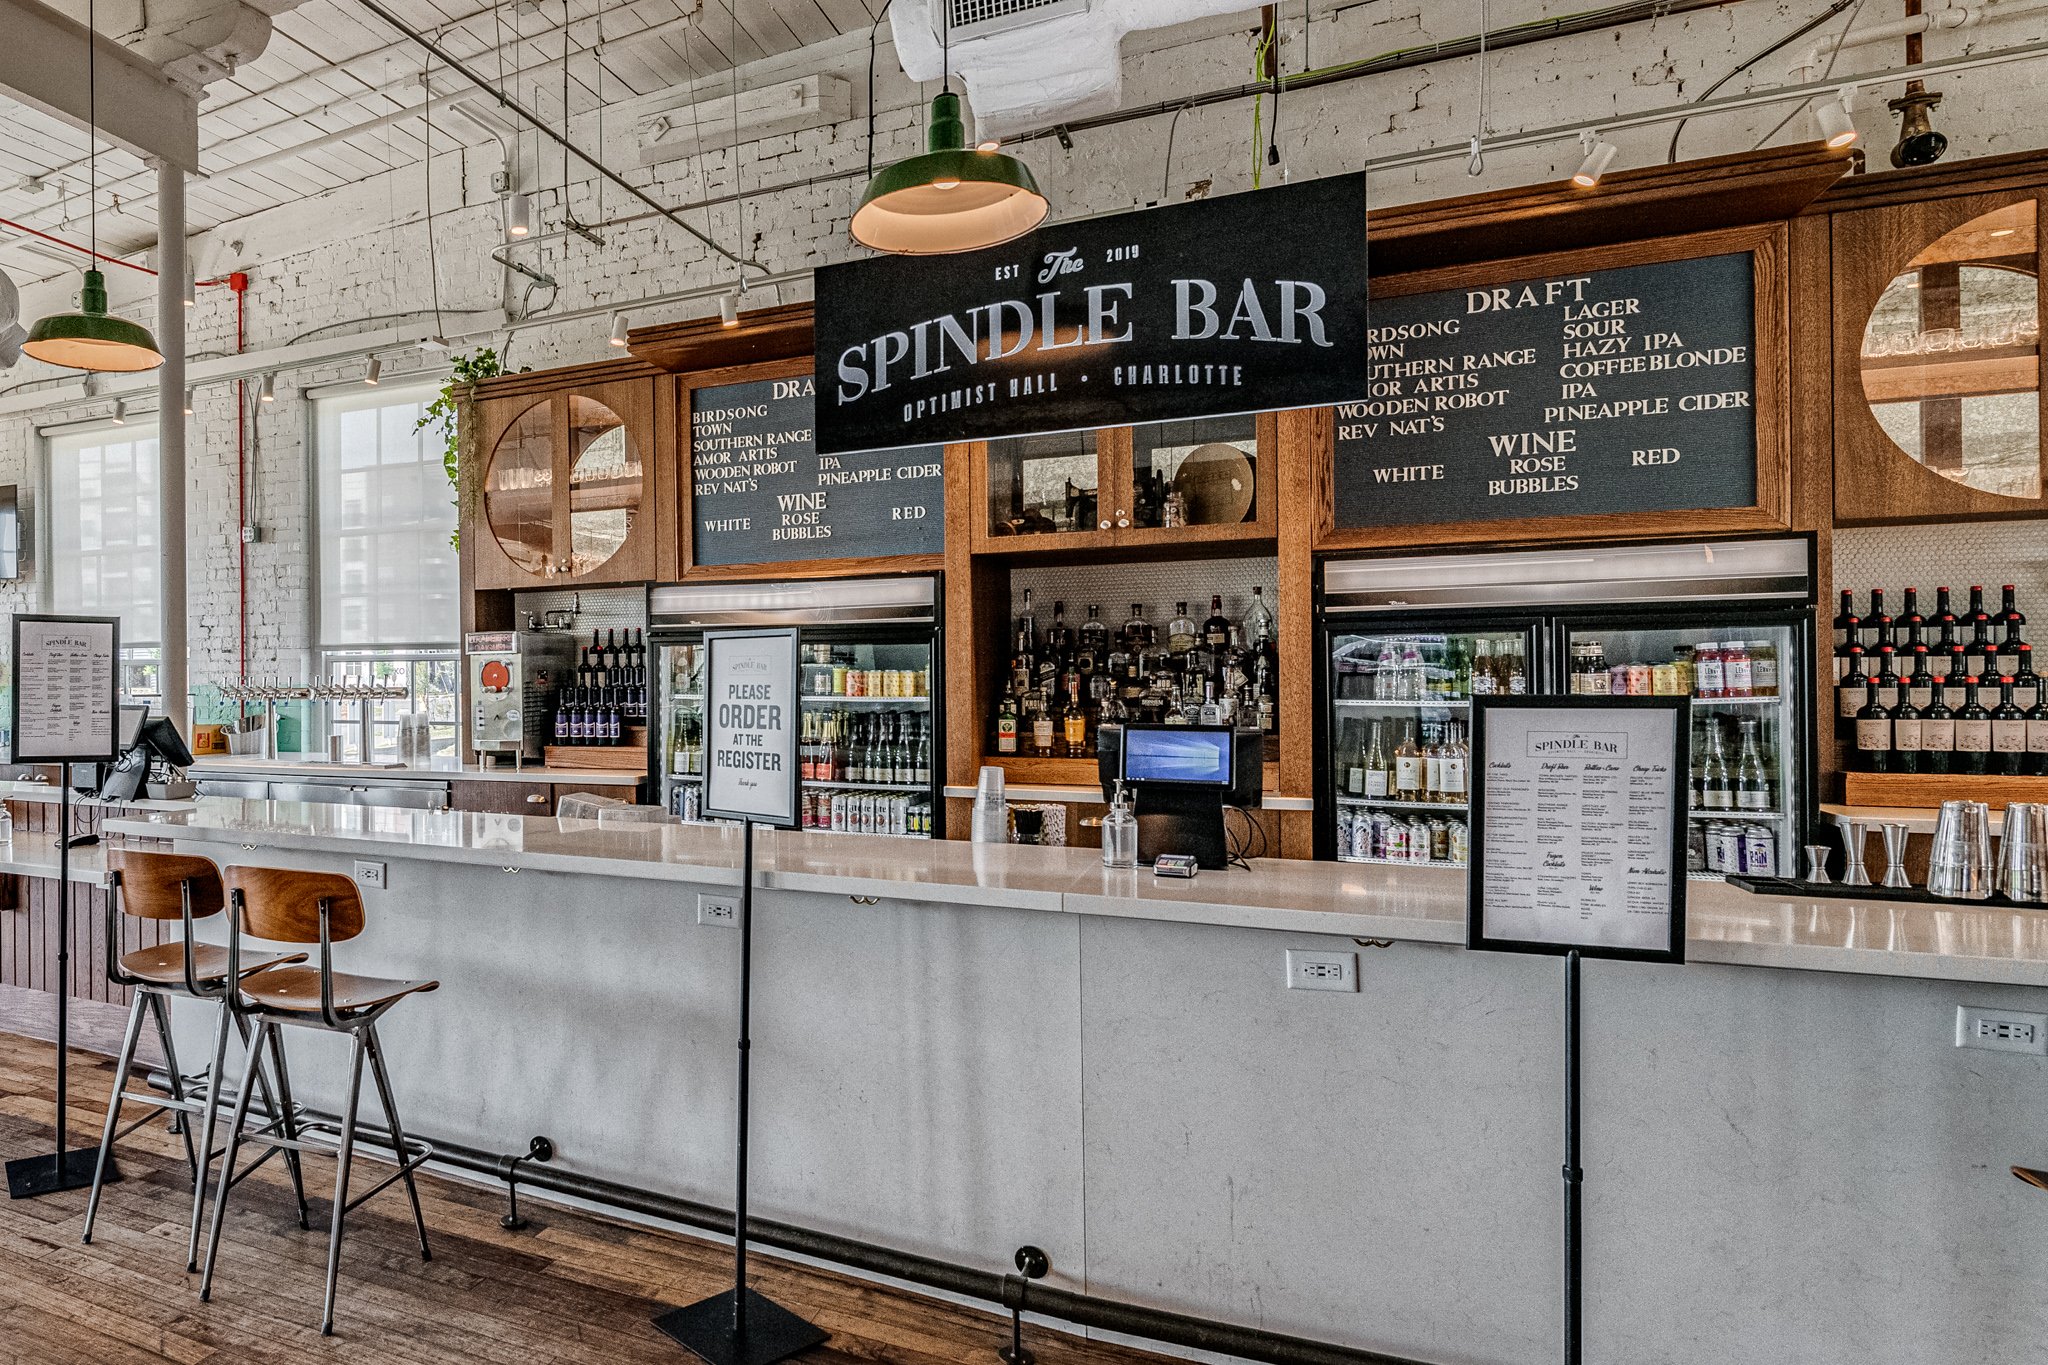 The Spindle Bar in Optimist Hall in Charlotte, NC